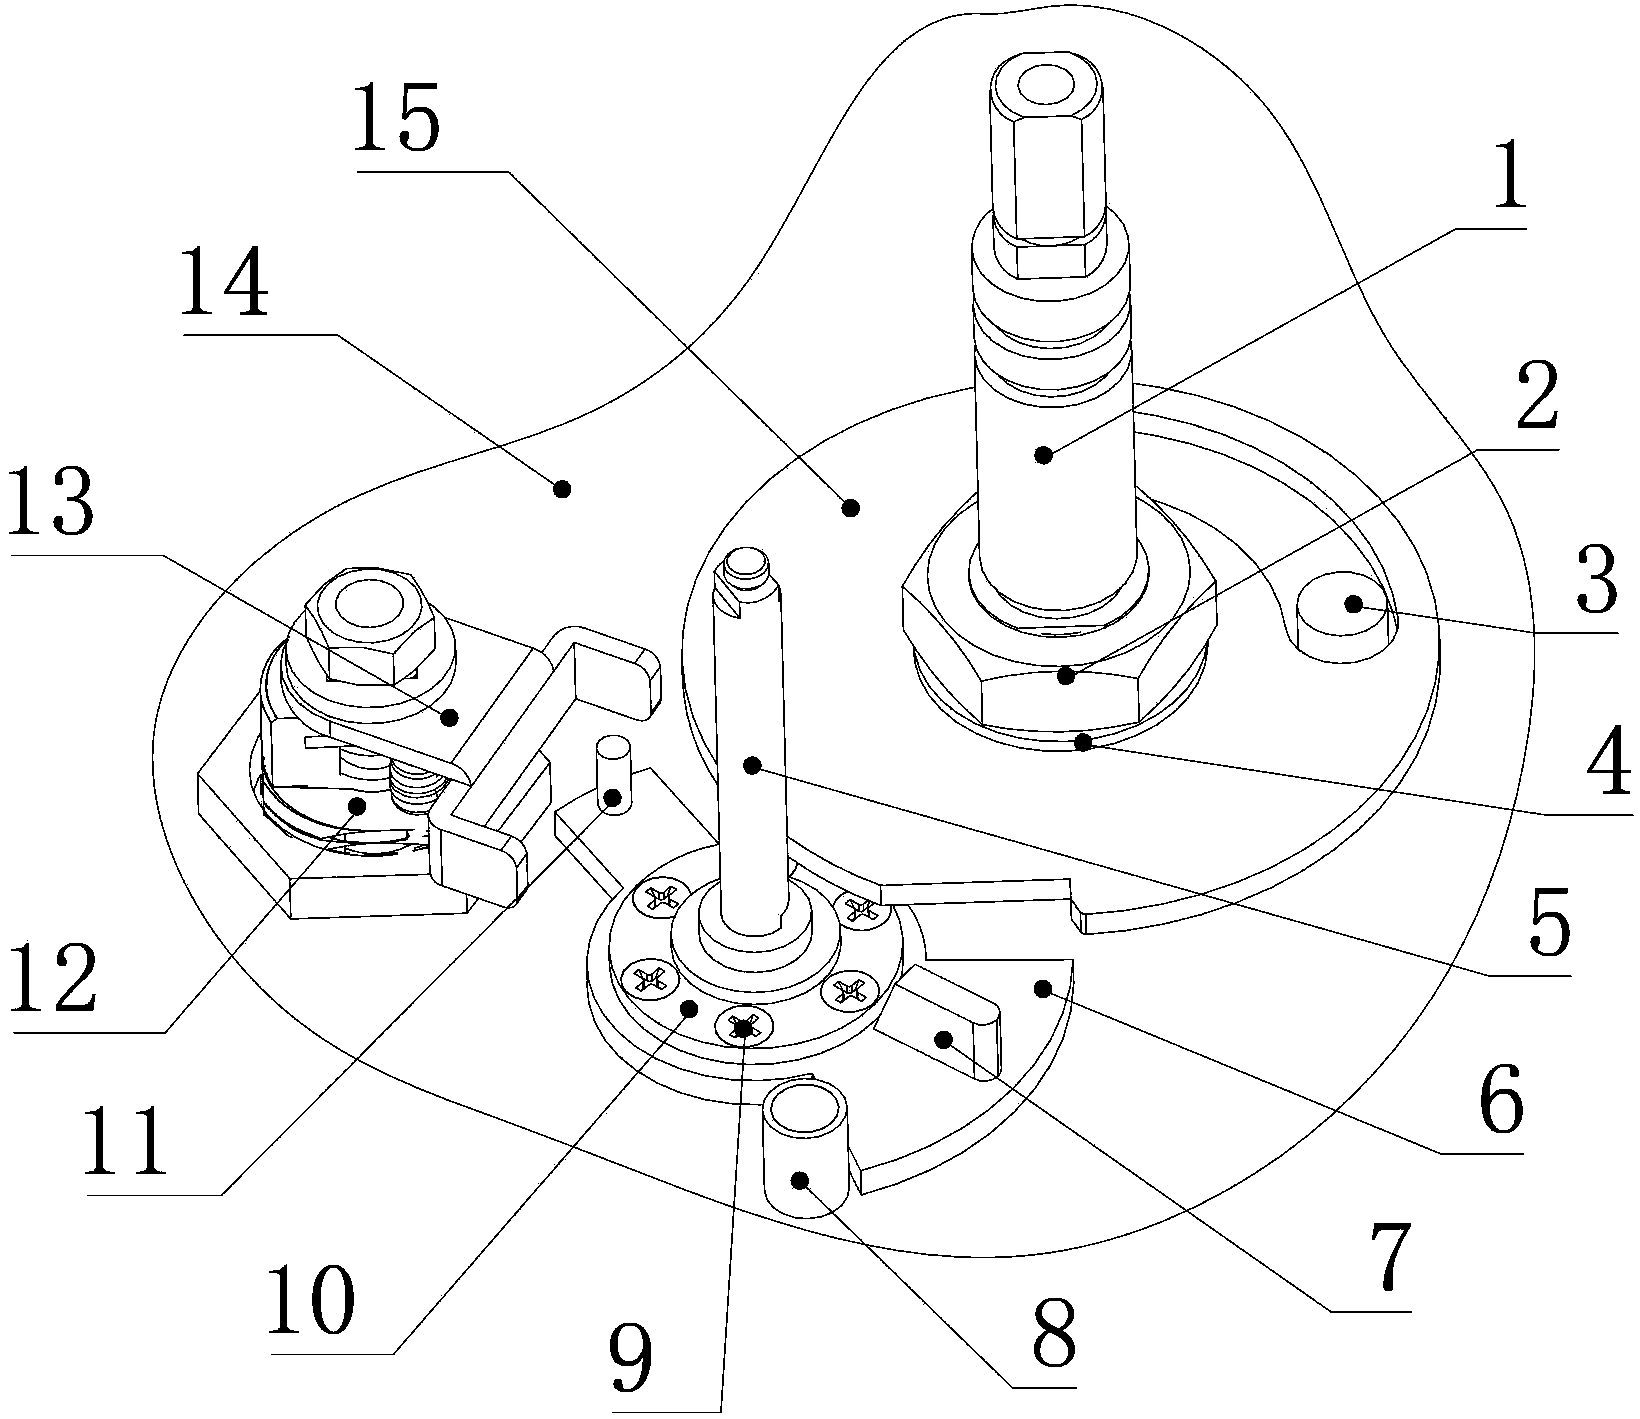 Device applied to locking and opening well lid lock and stably keeping